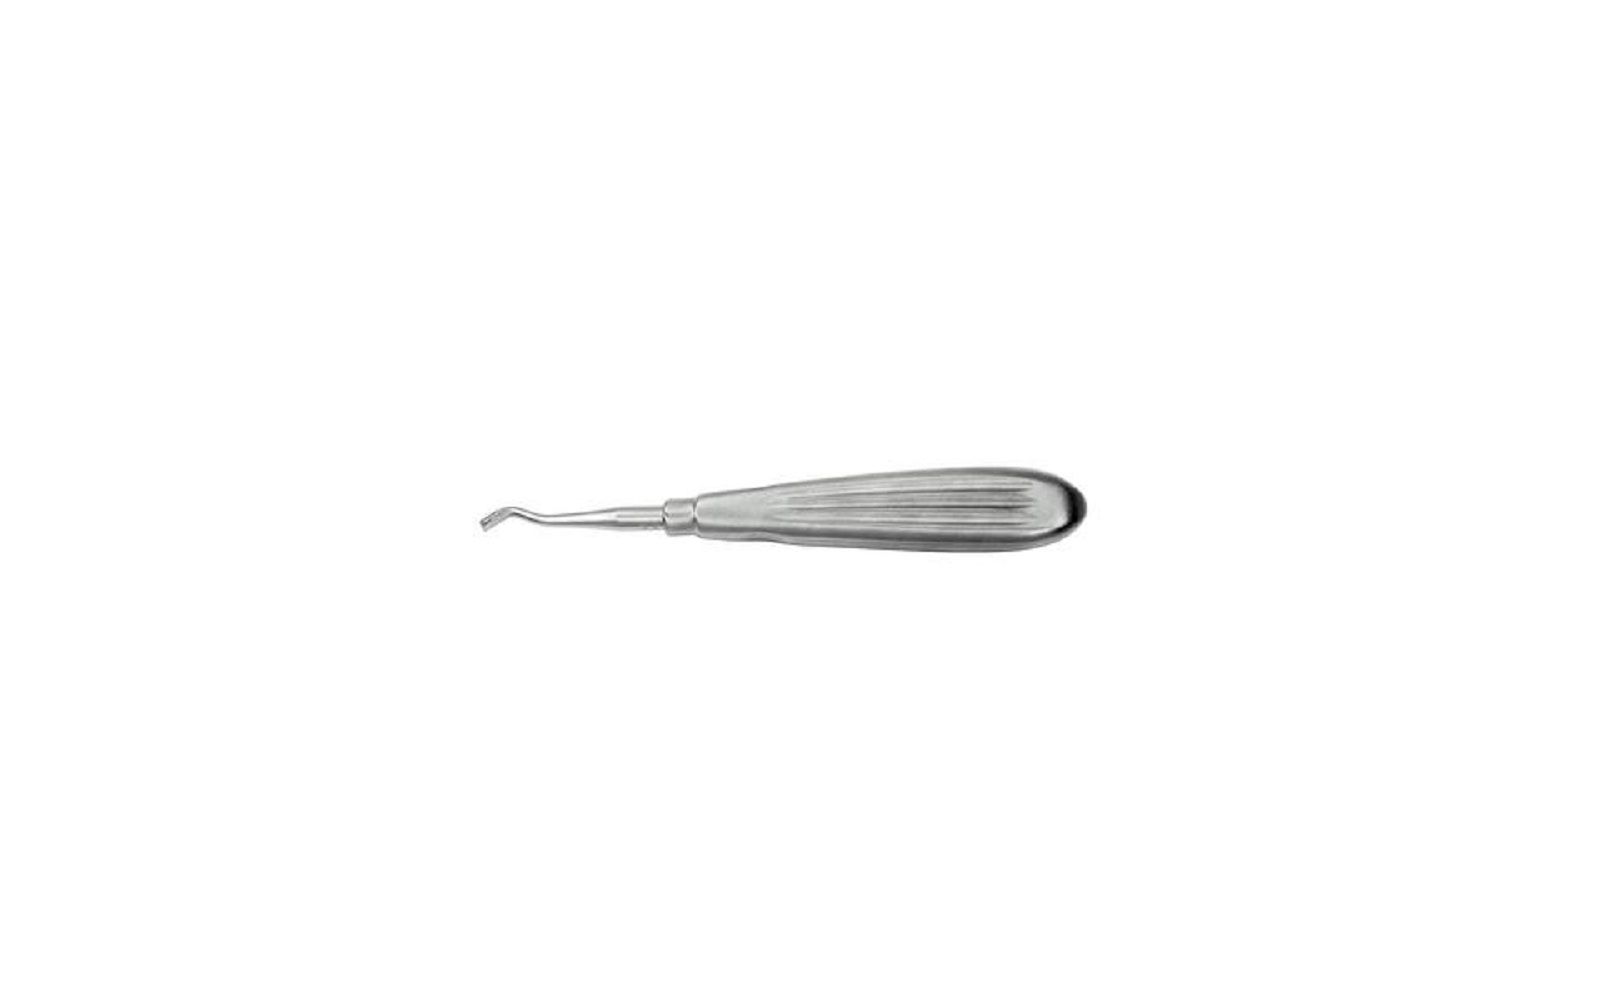 Orthodontic small tip band pusher scaler, single end